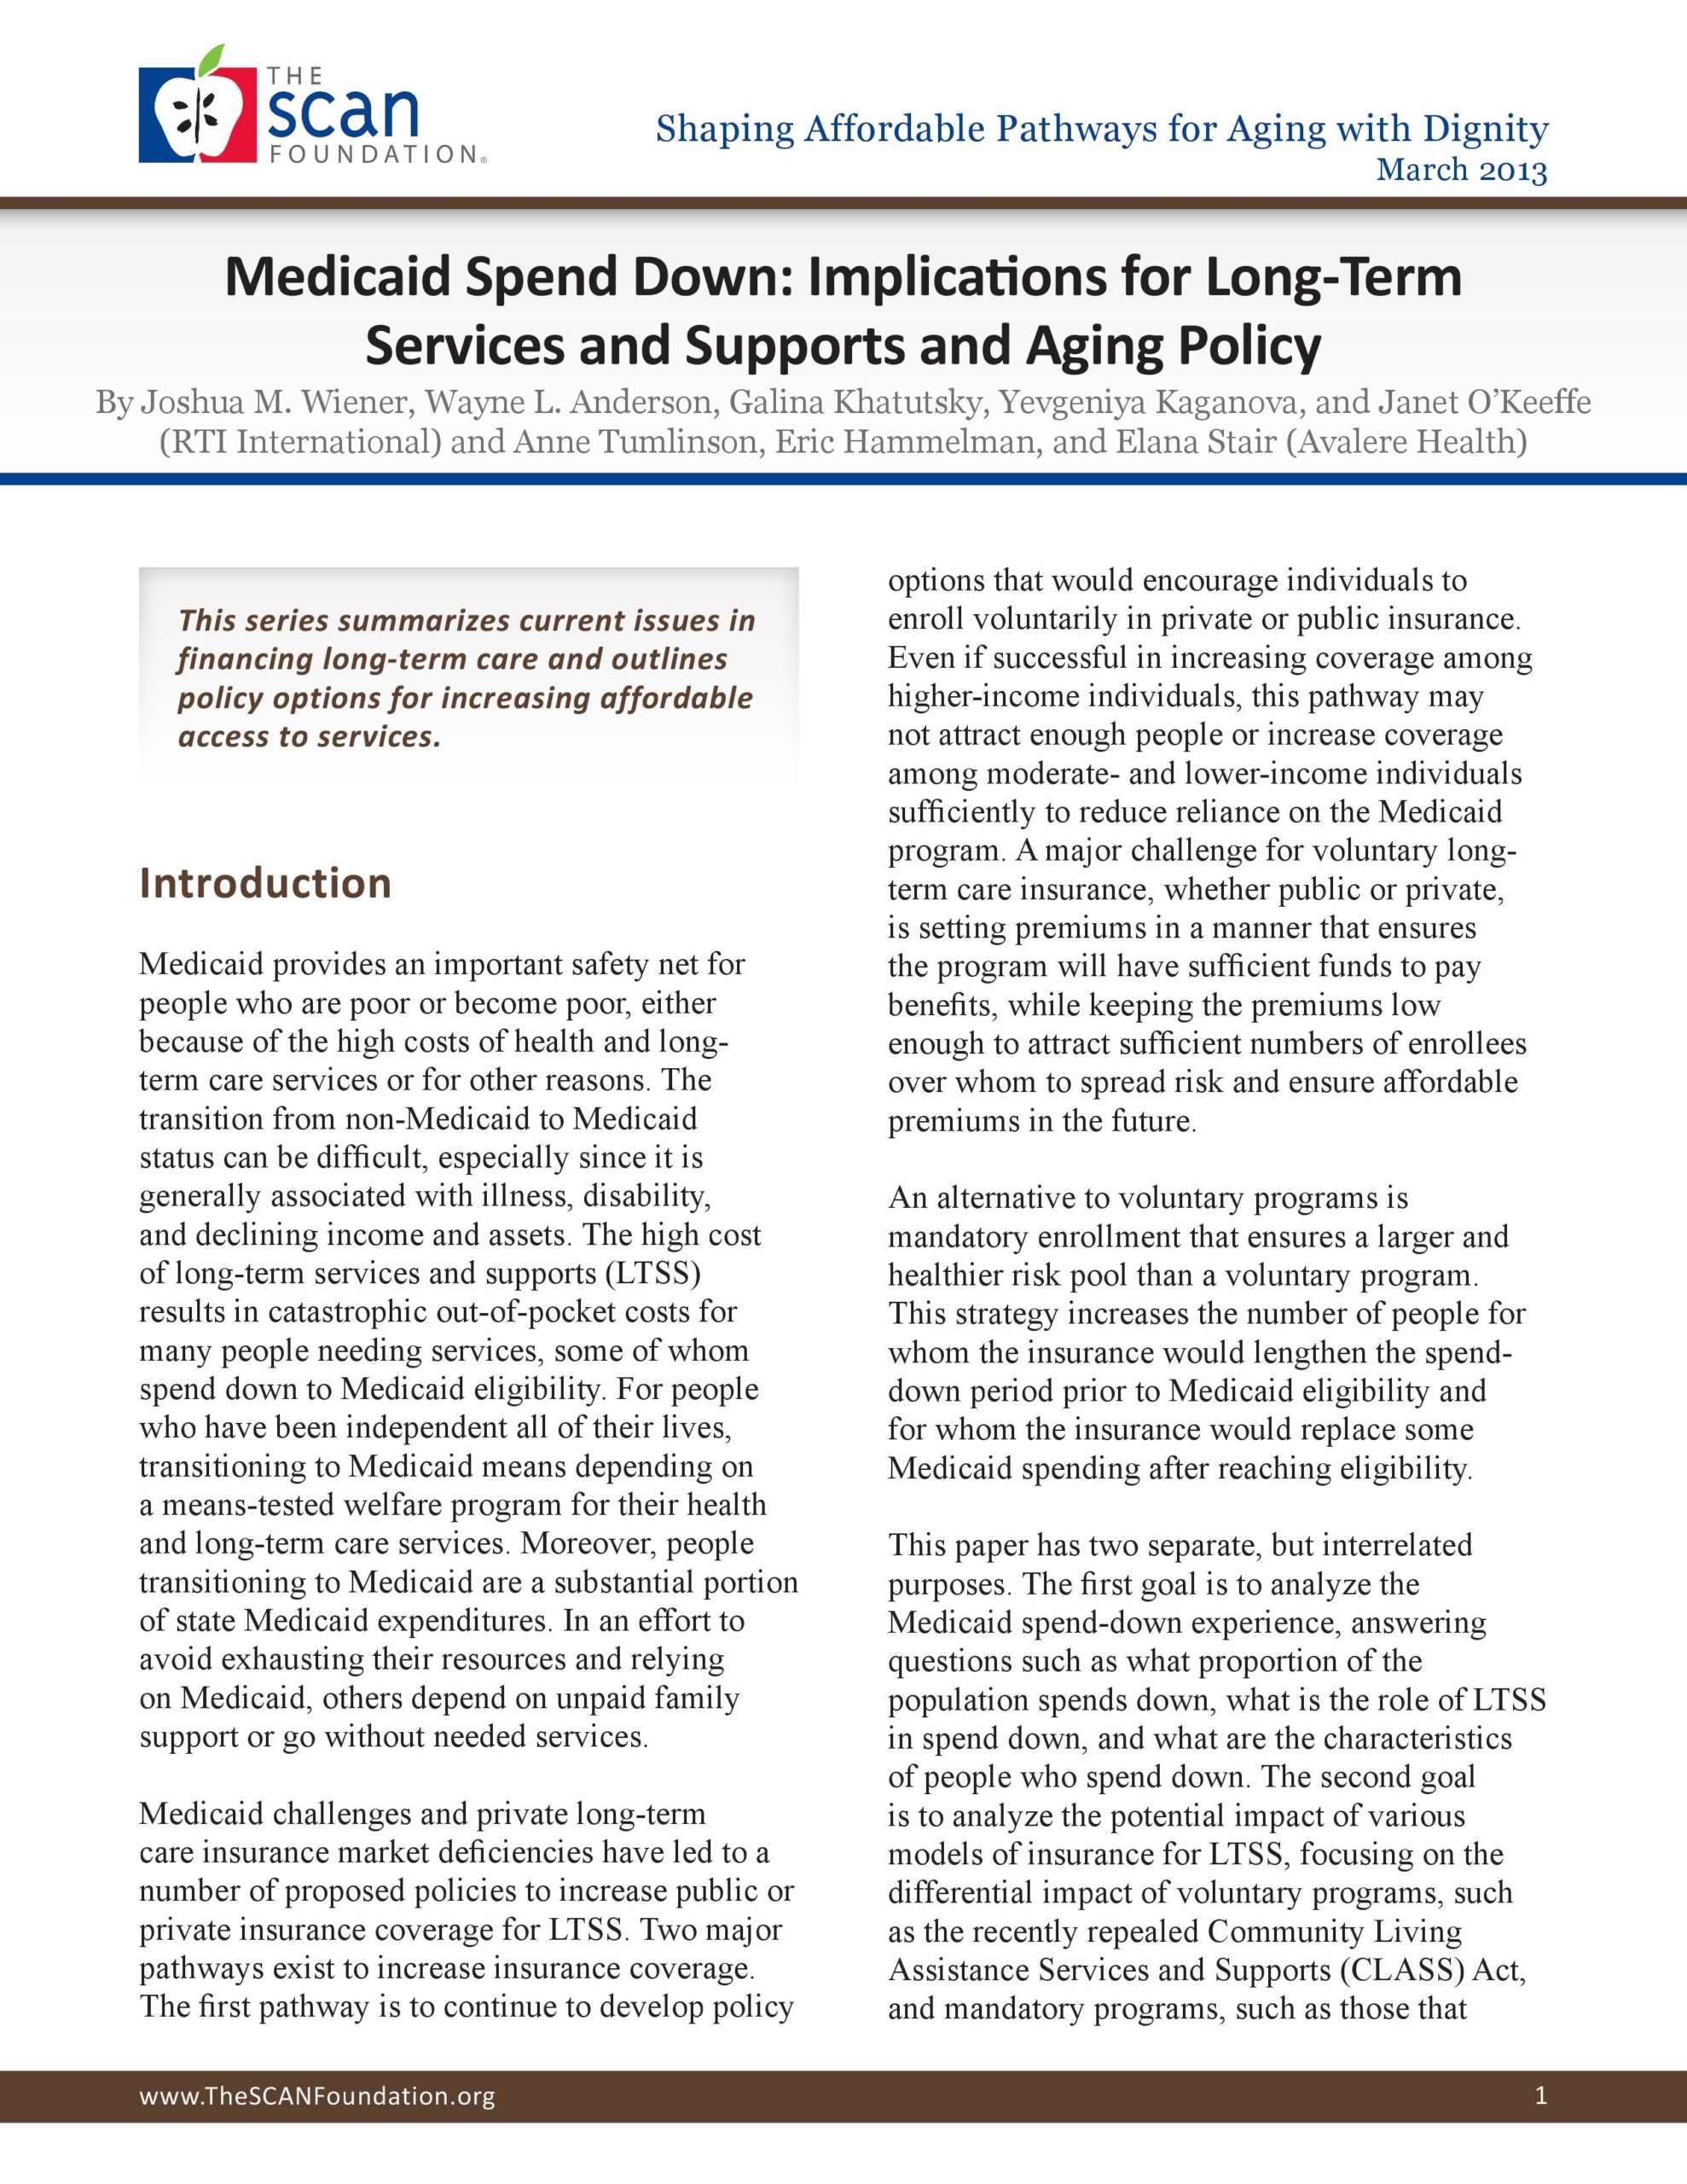 Medicaid Spend Down: Implications for Long-Term Services and Supports and Aging Policy